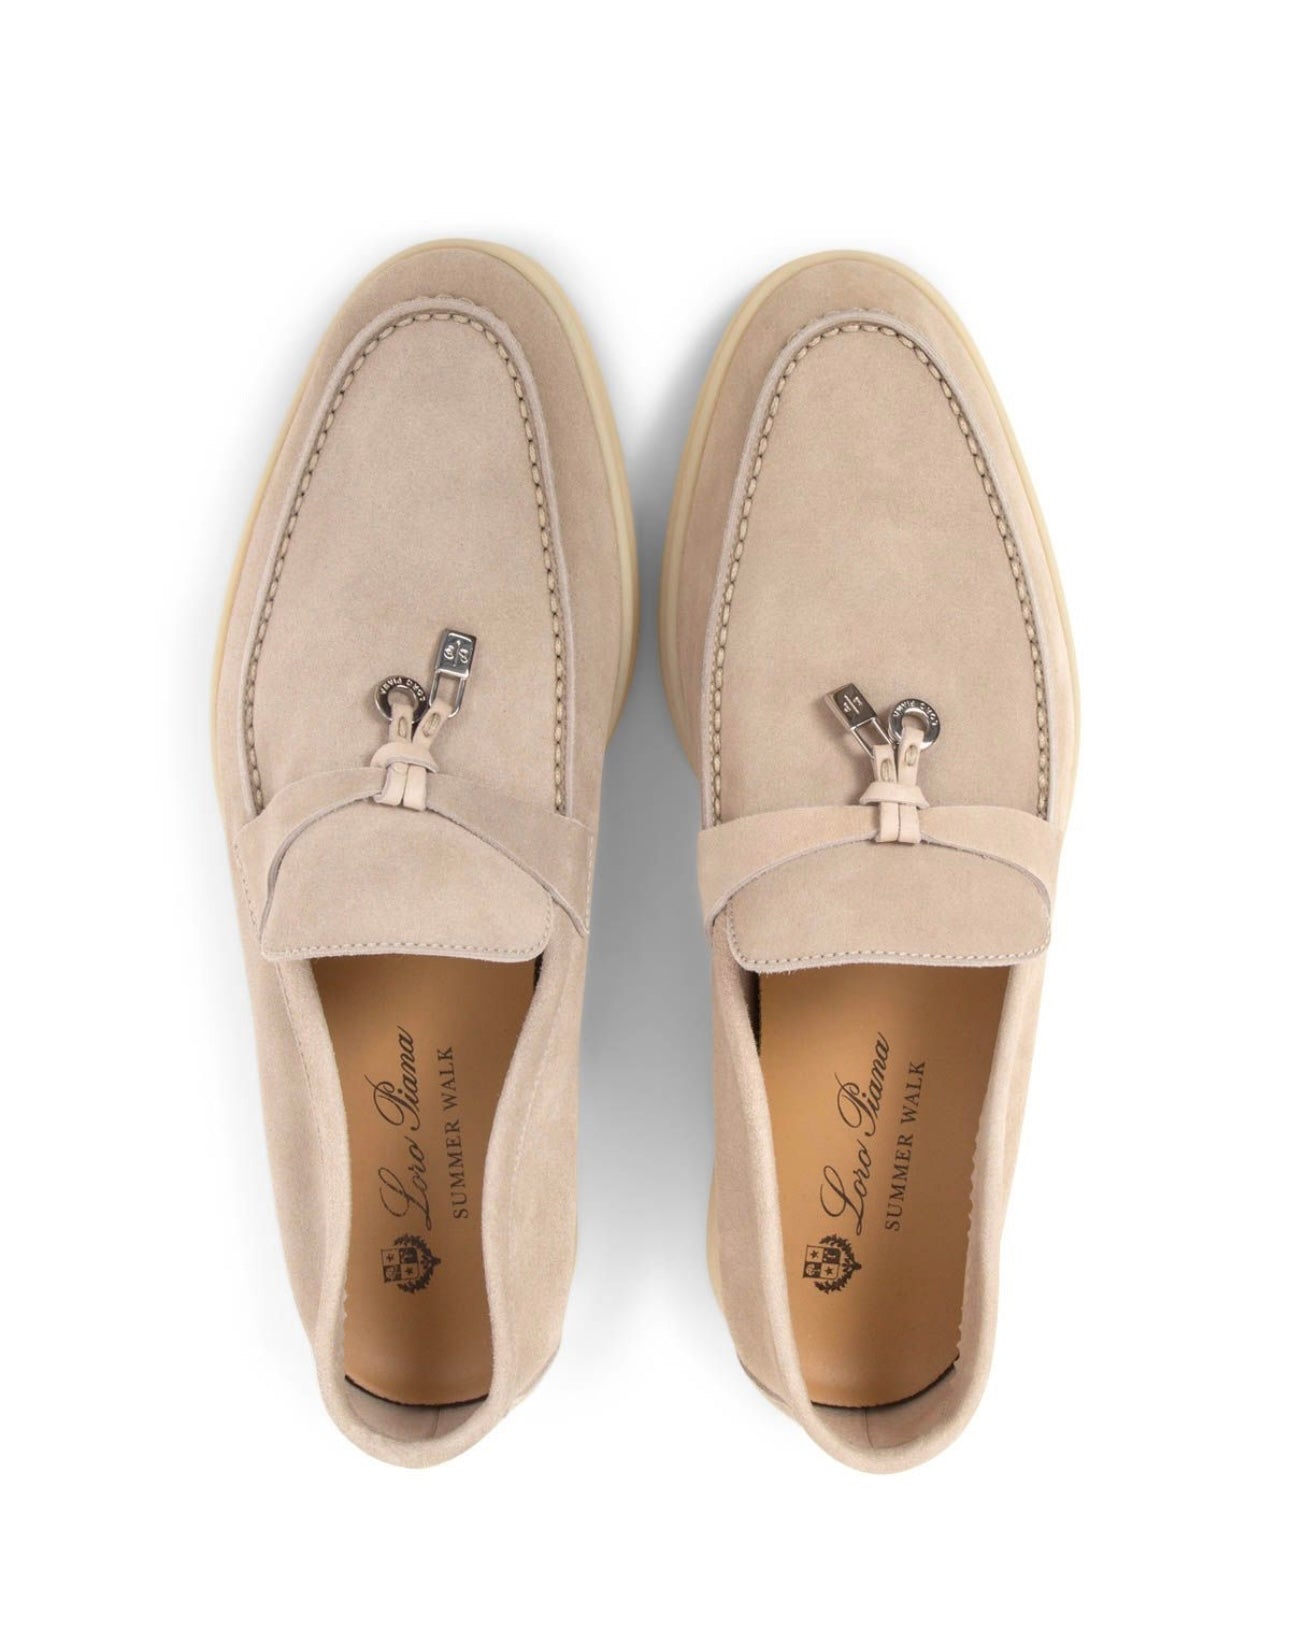 Loro Piana - Summer Charms Walk Suede Loafers